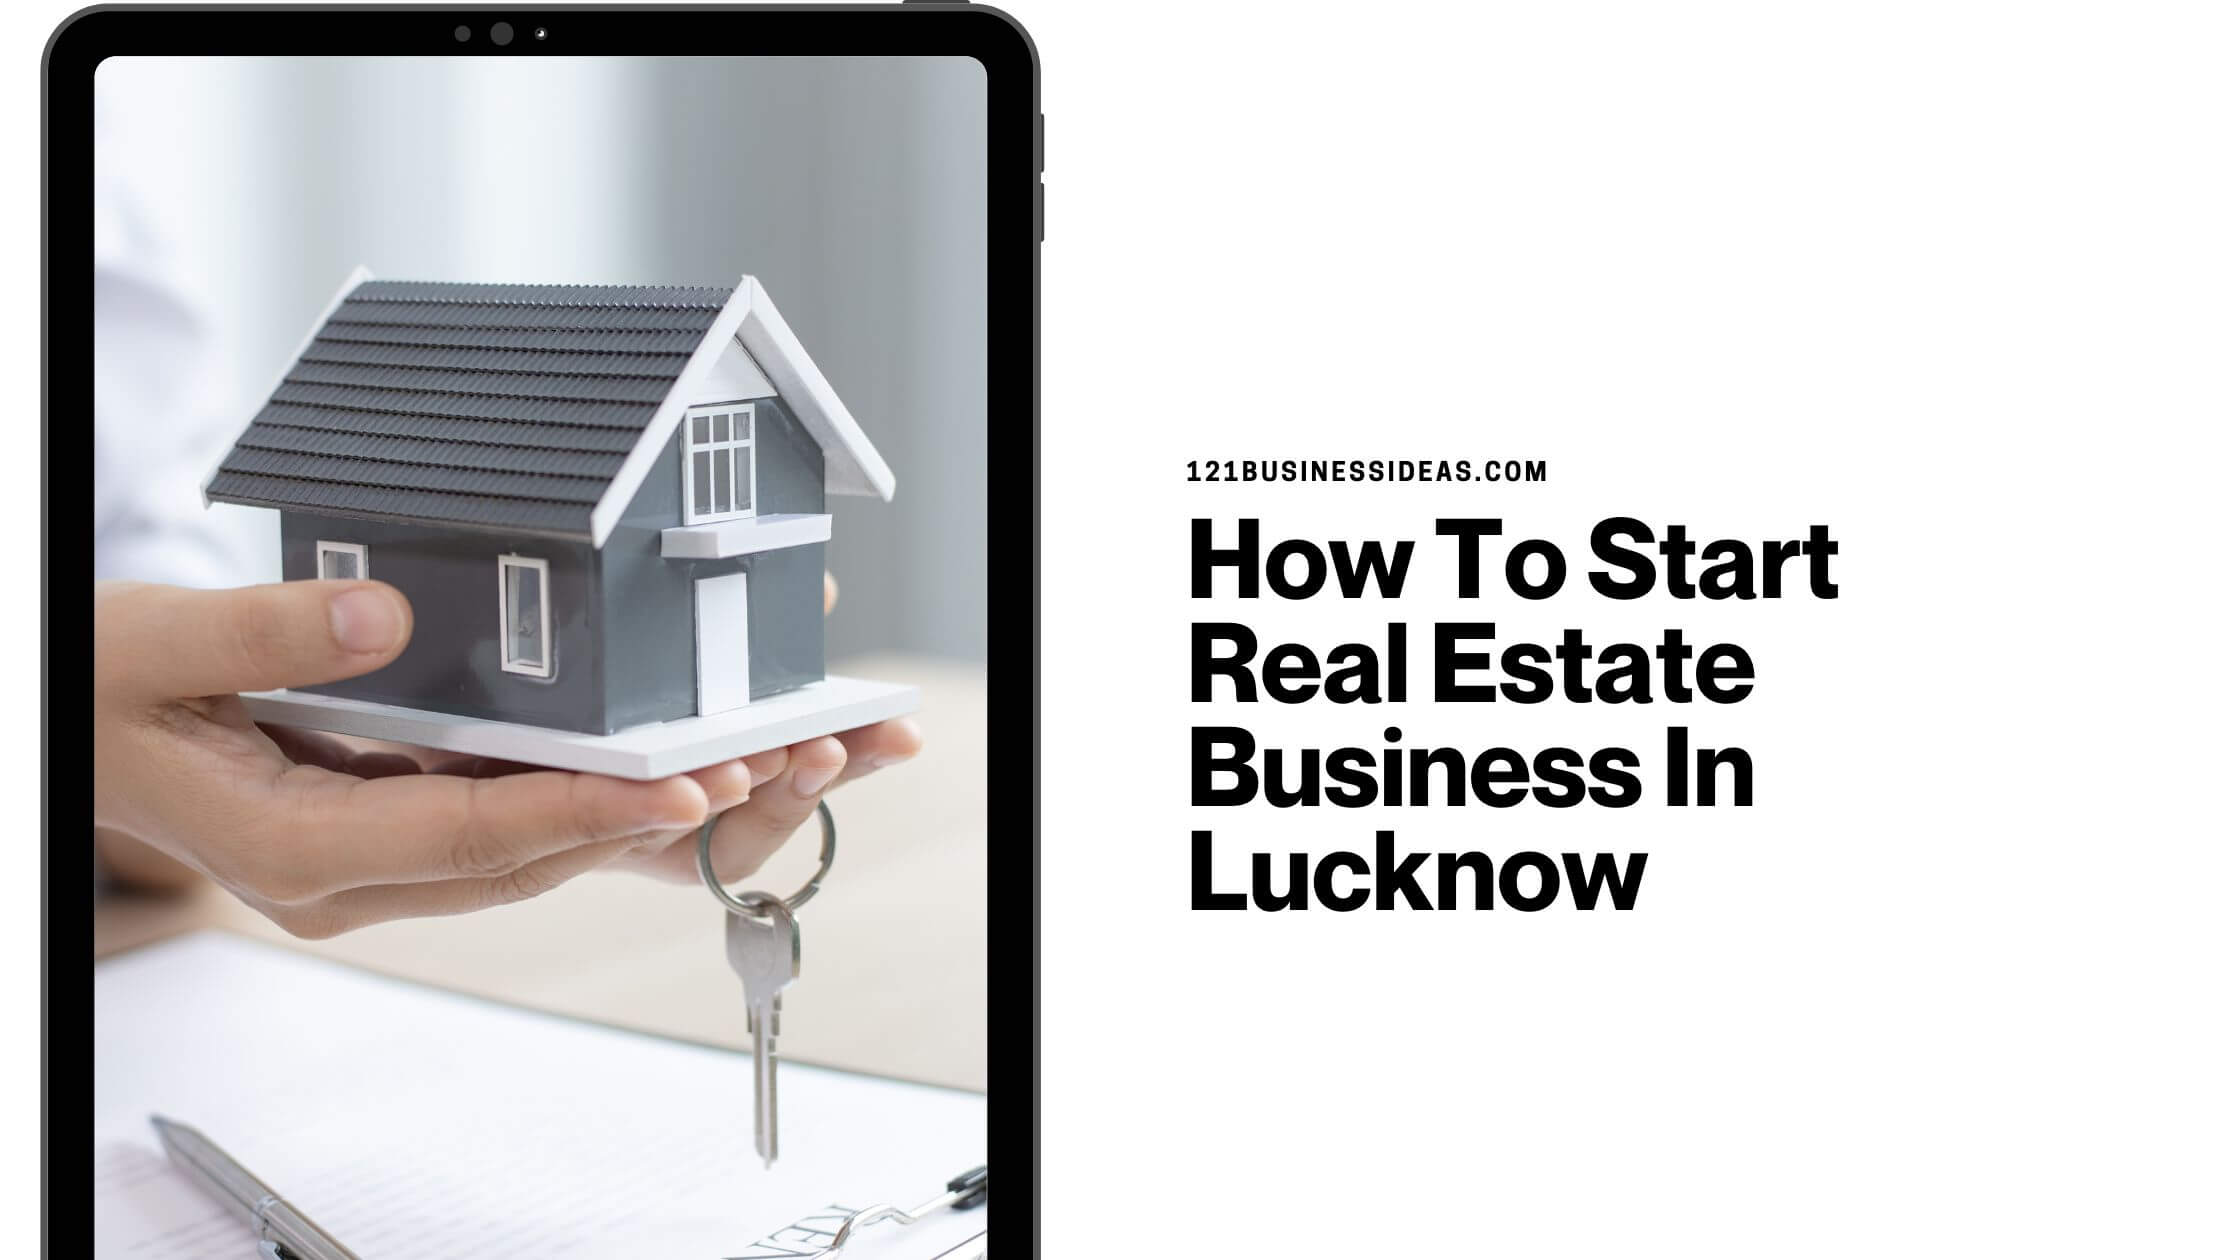 How To Start Real Estate Business In Lucknow (1)